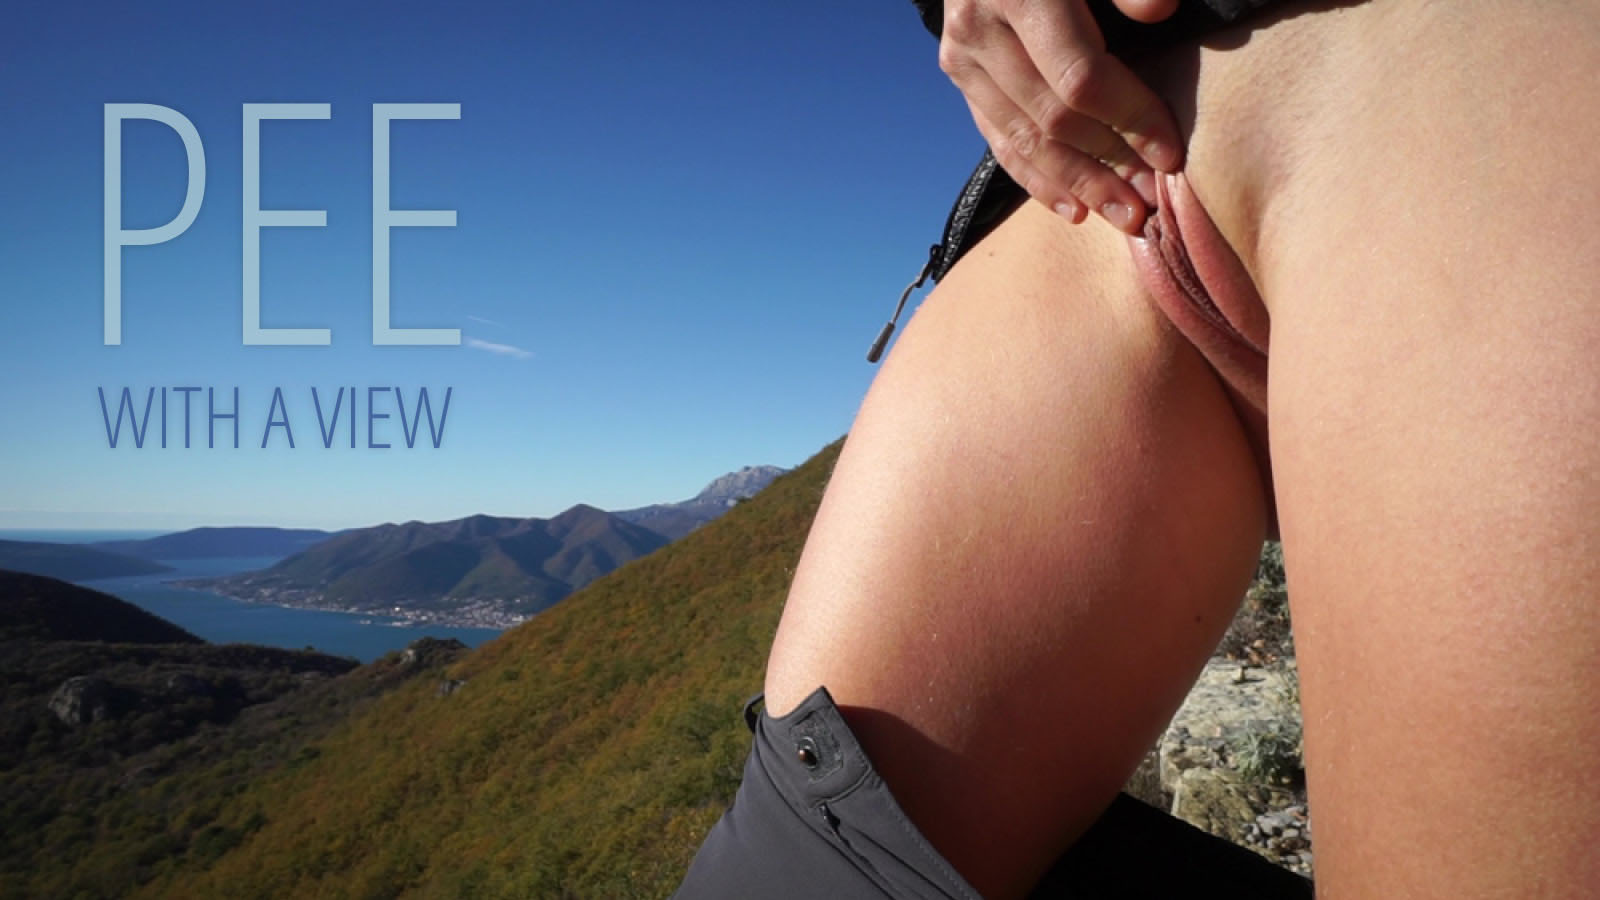 Thumbnail for Pee with a View